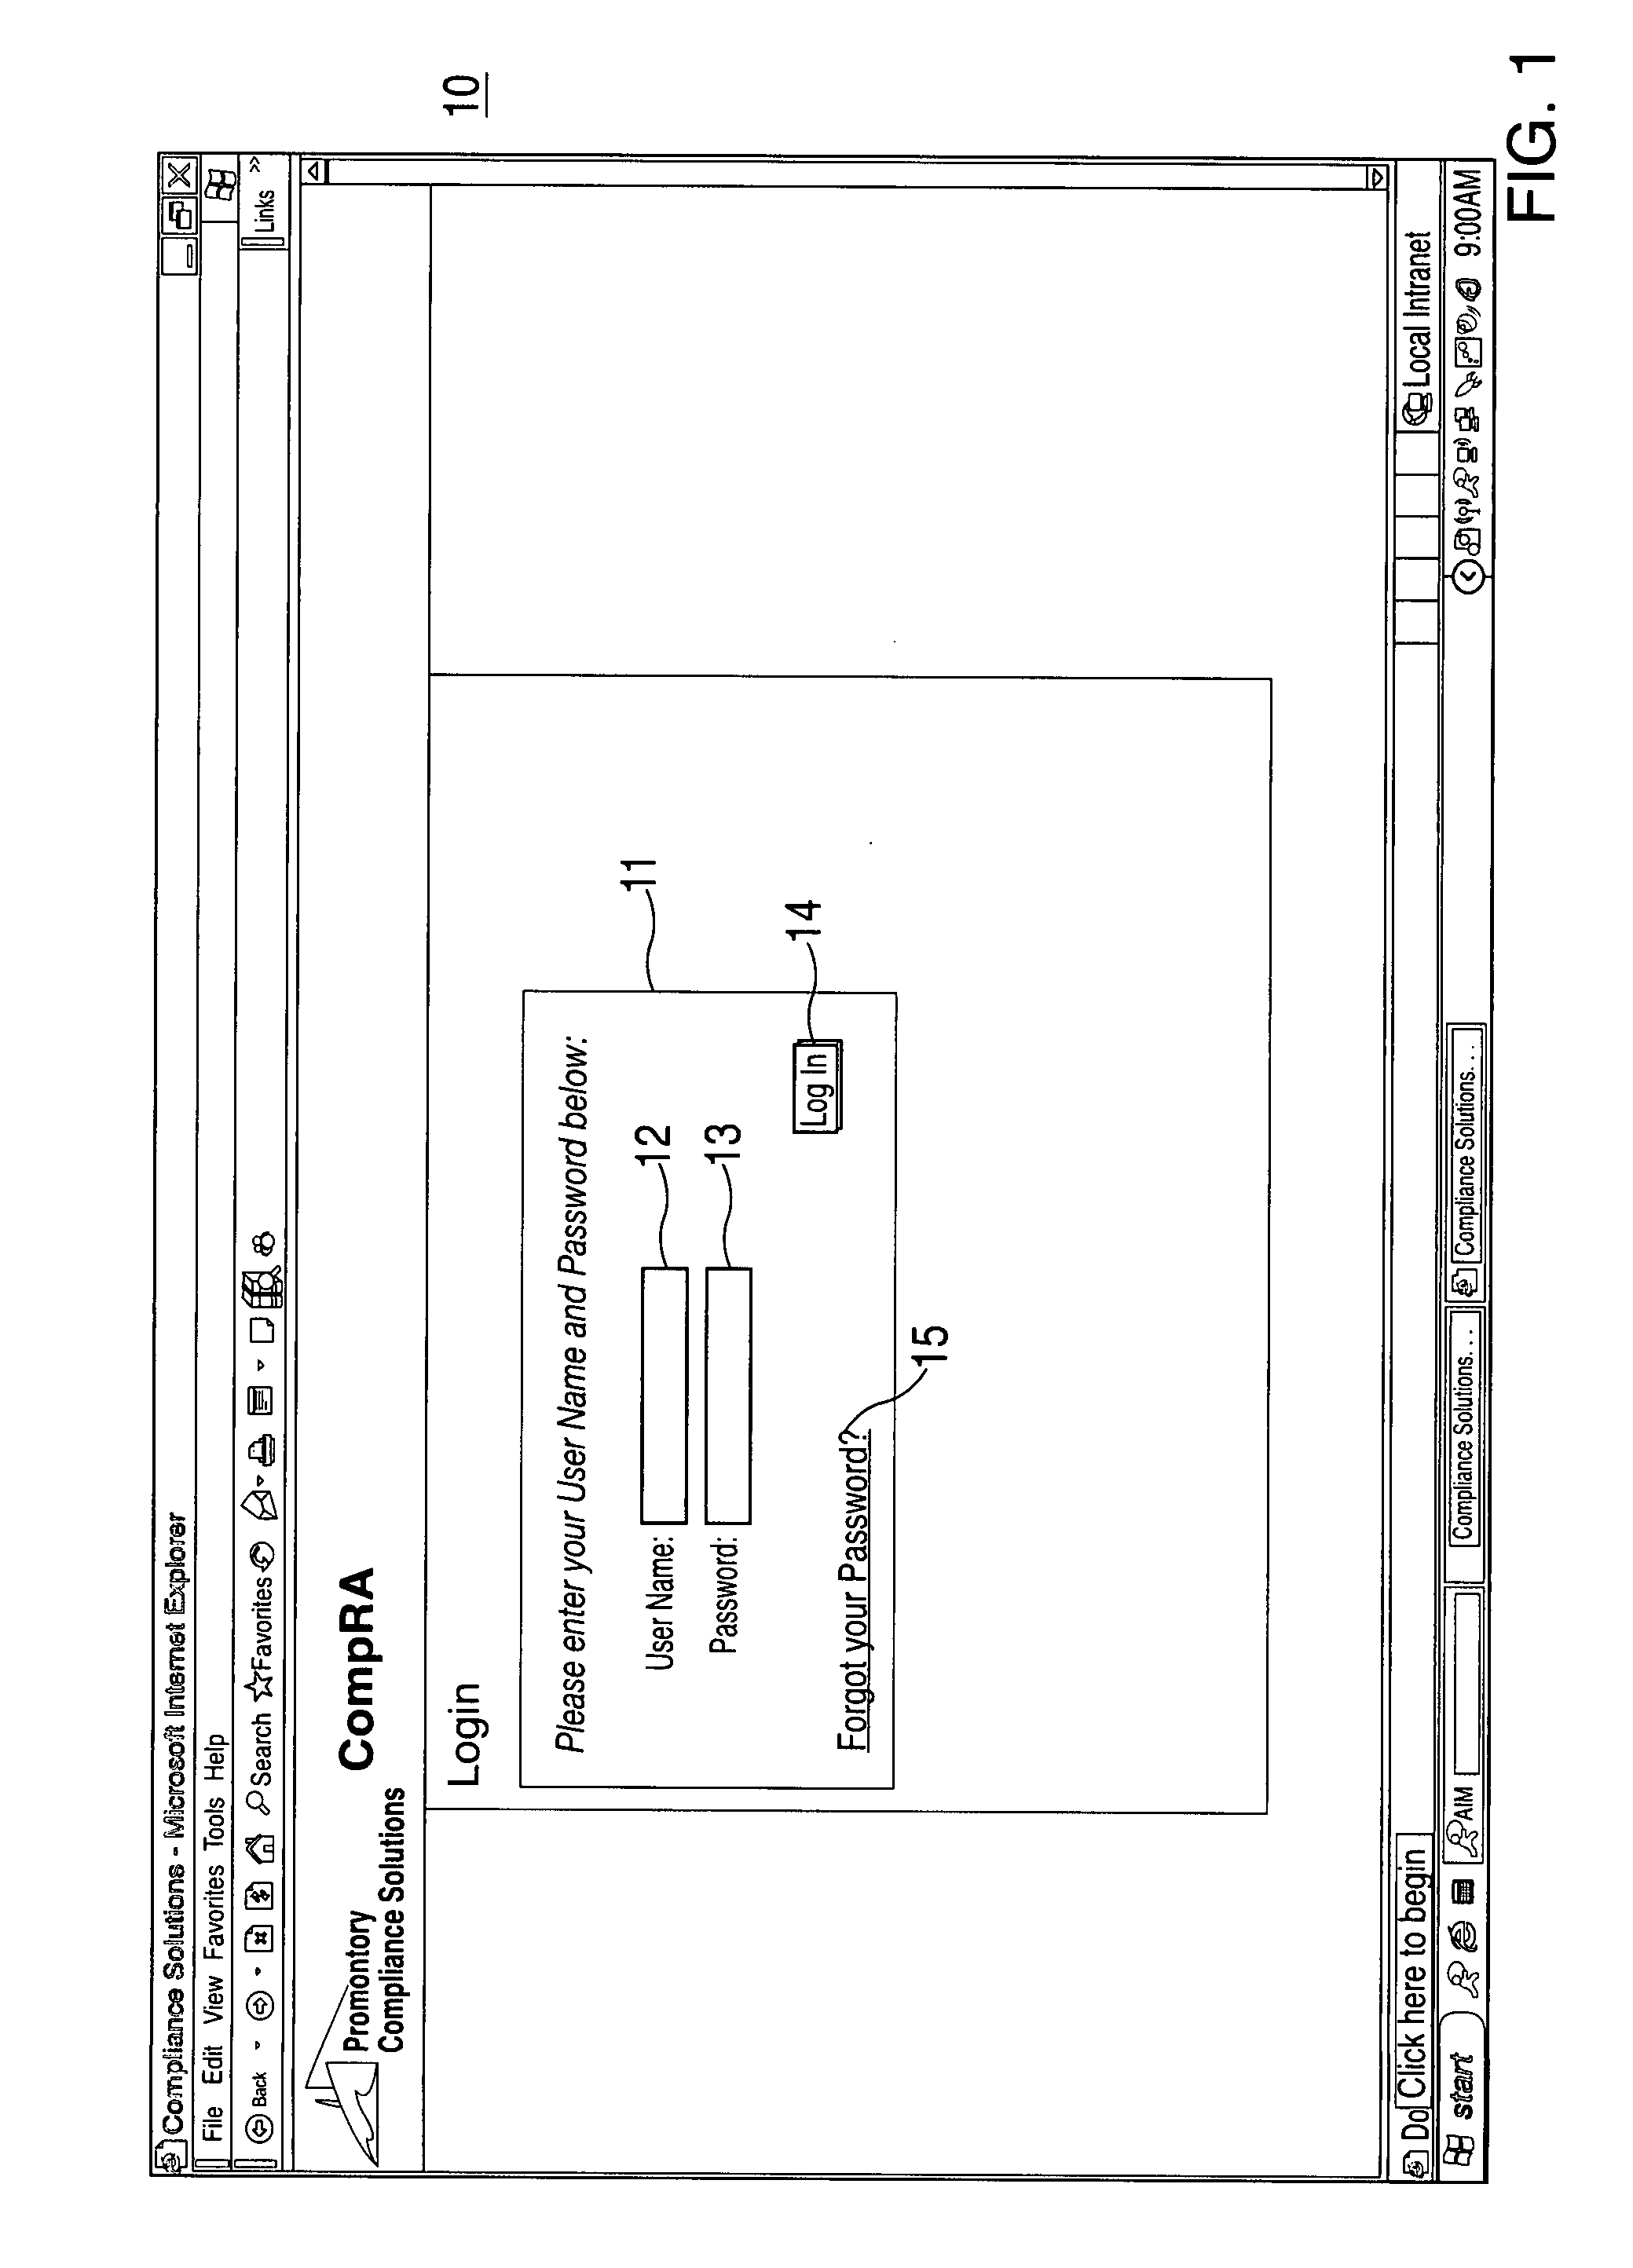 Method and apparatus for managing risk, such as compliance risk, in an organization